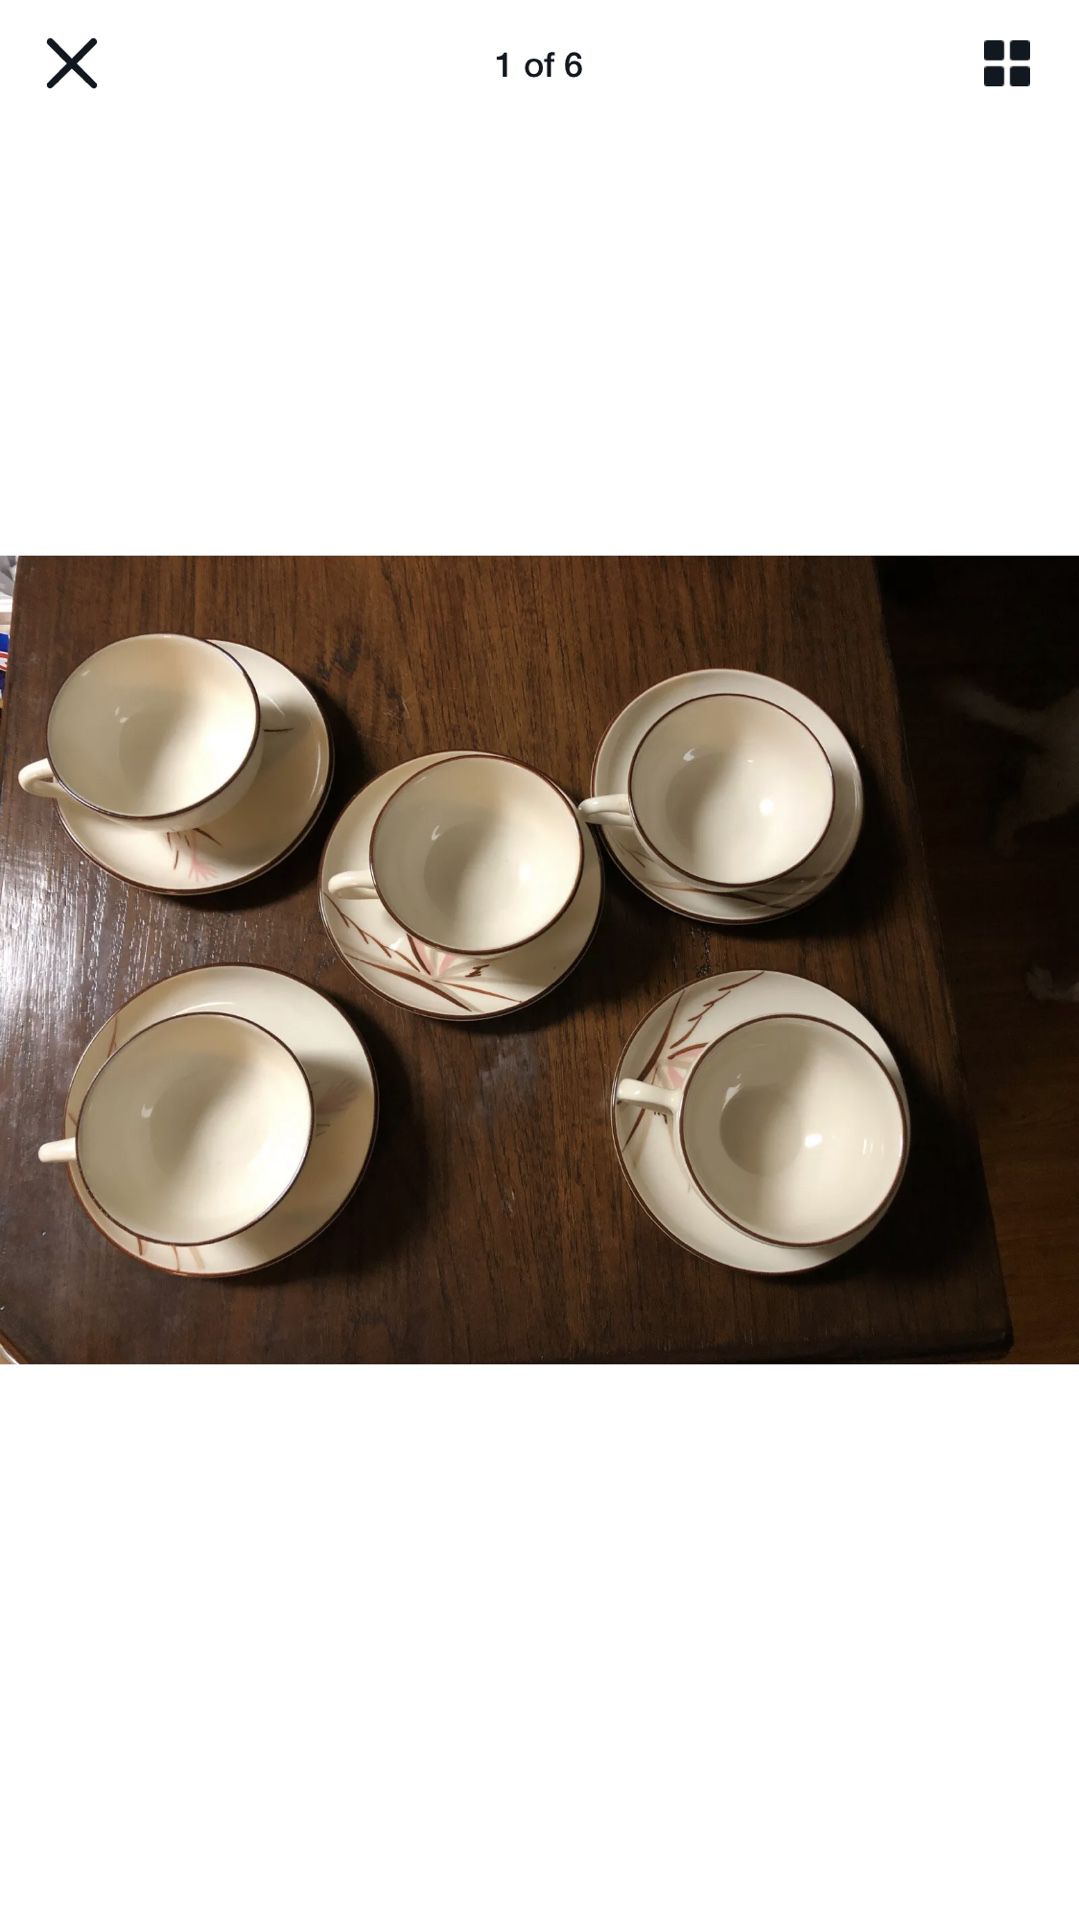 Winfield Ware Handcraft China 10 pieces Tea Cups And Saucers